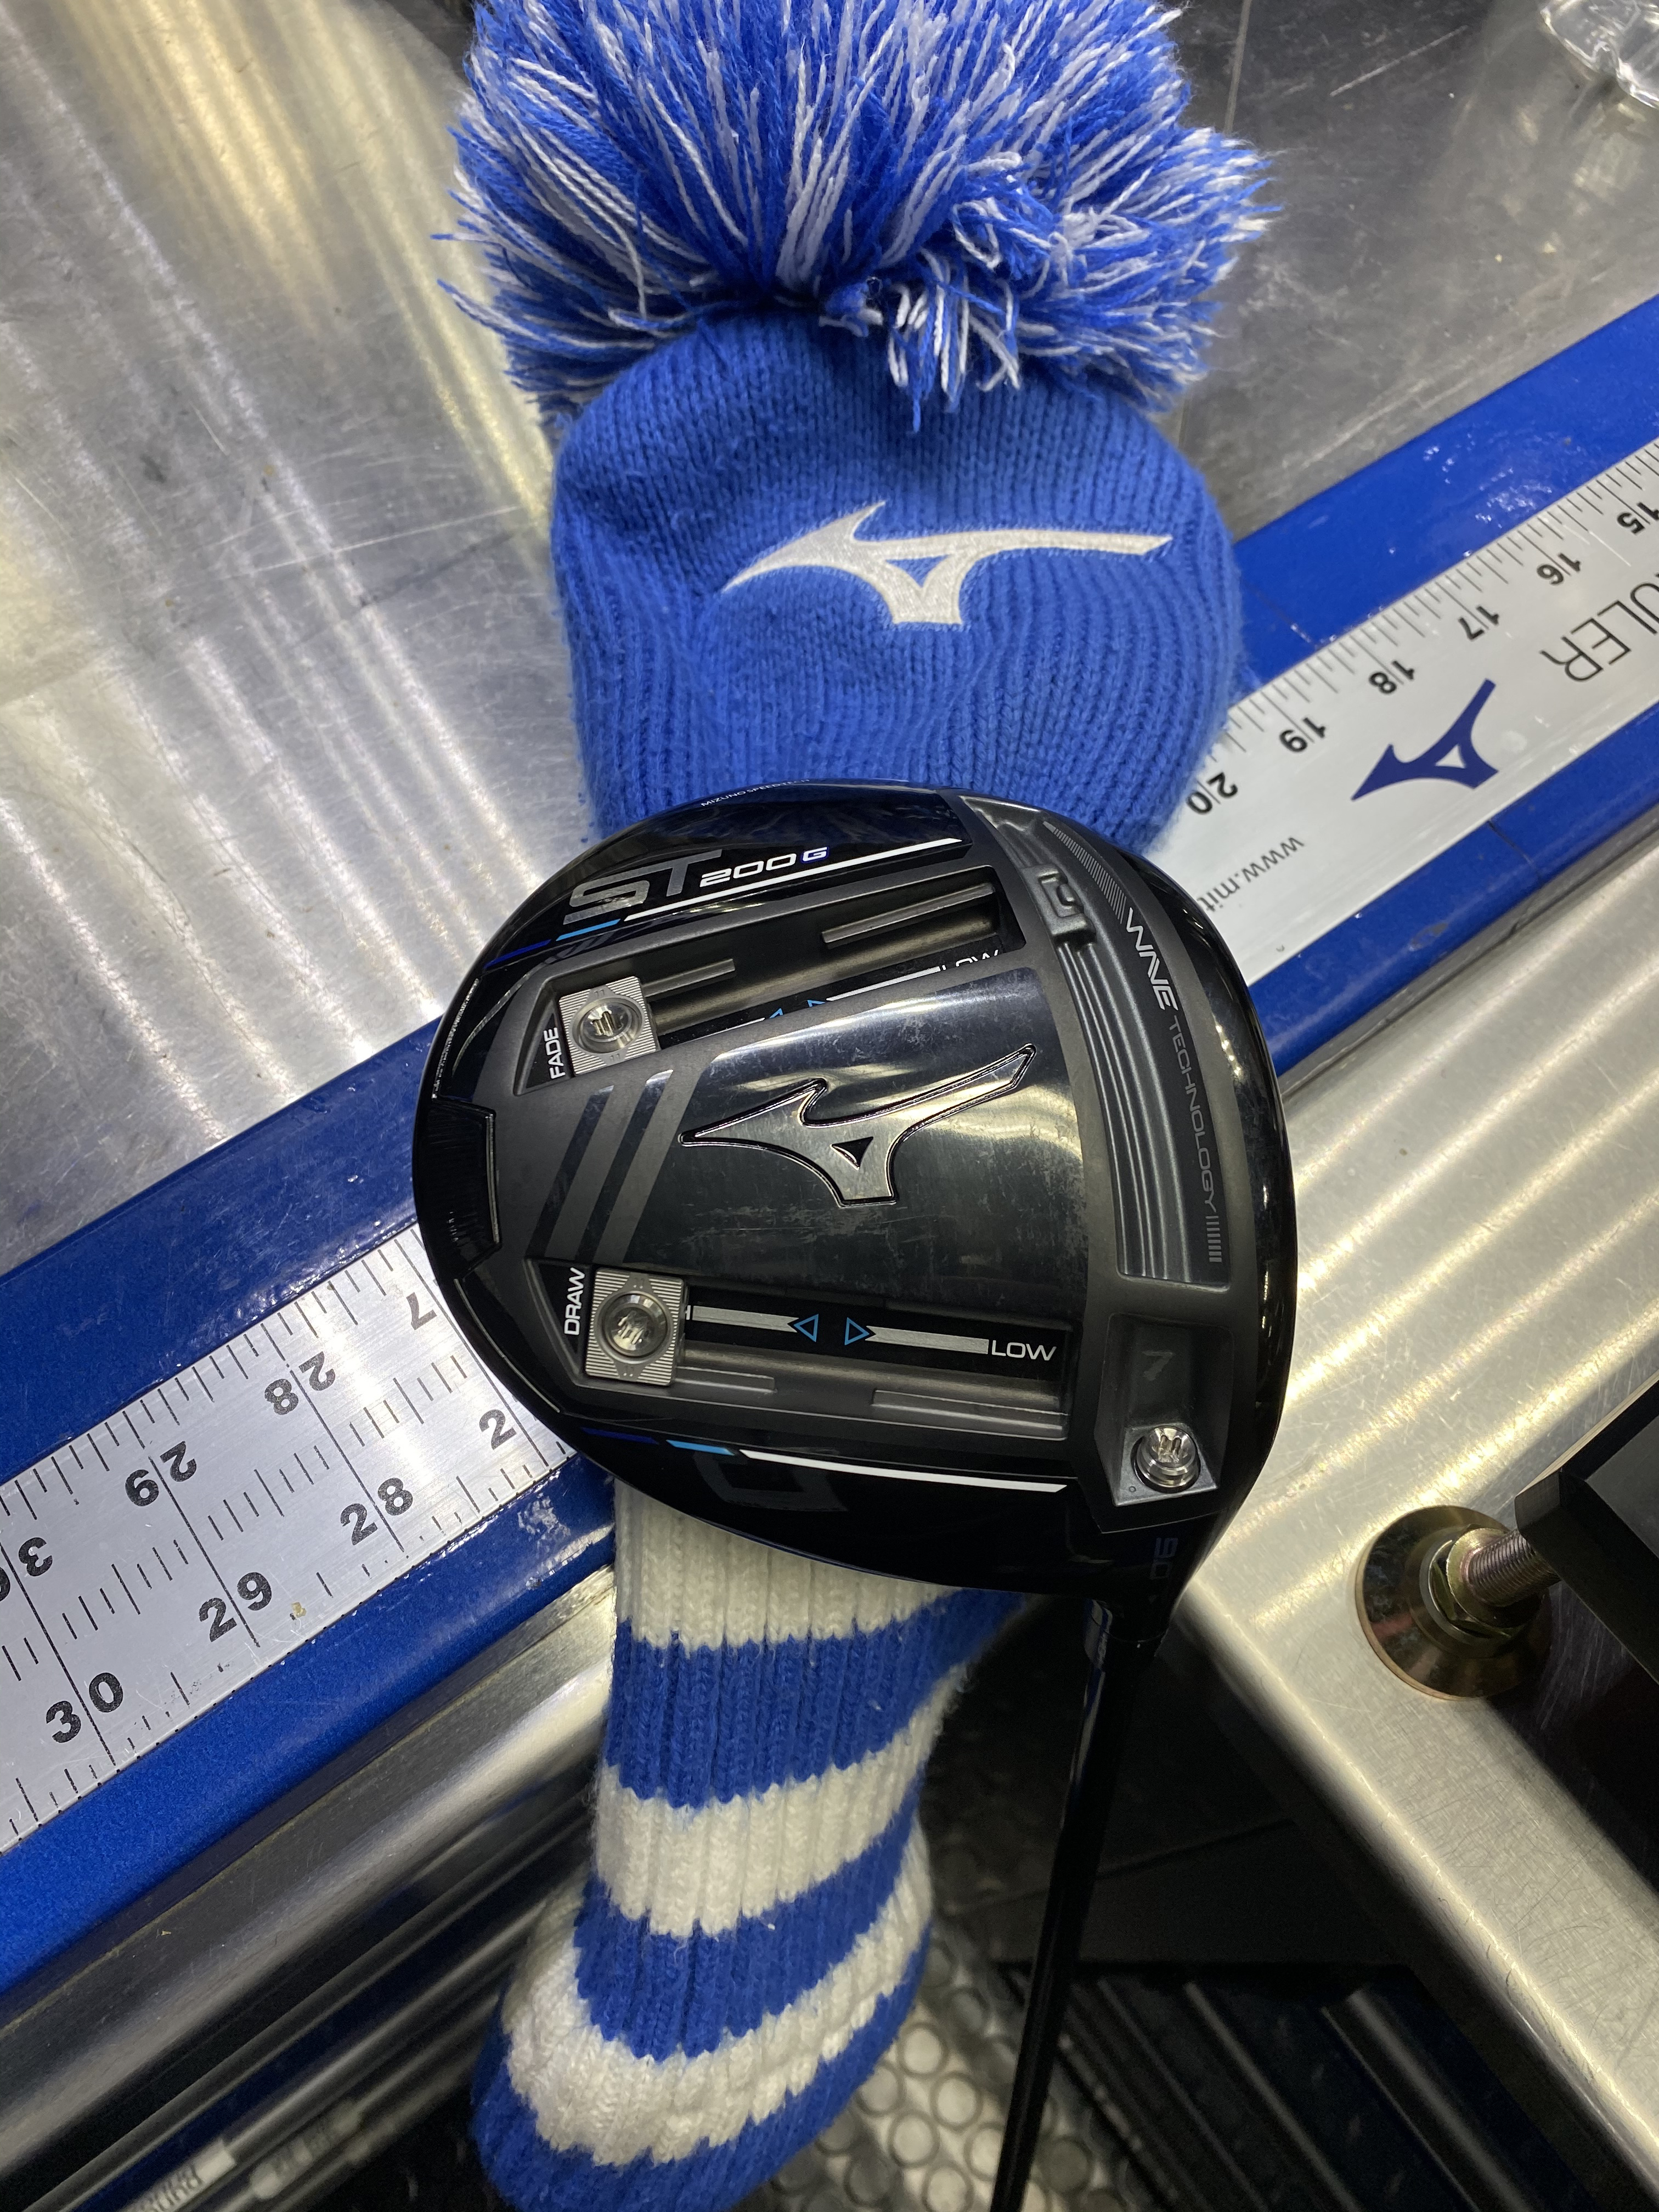 Mizuno ST200 Drivers make their first appearance on PGA Tour